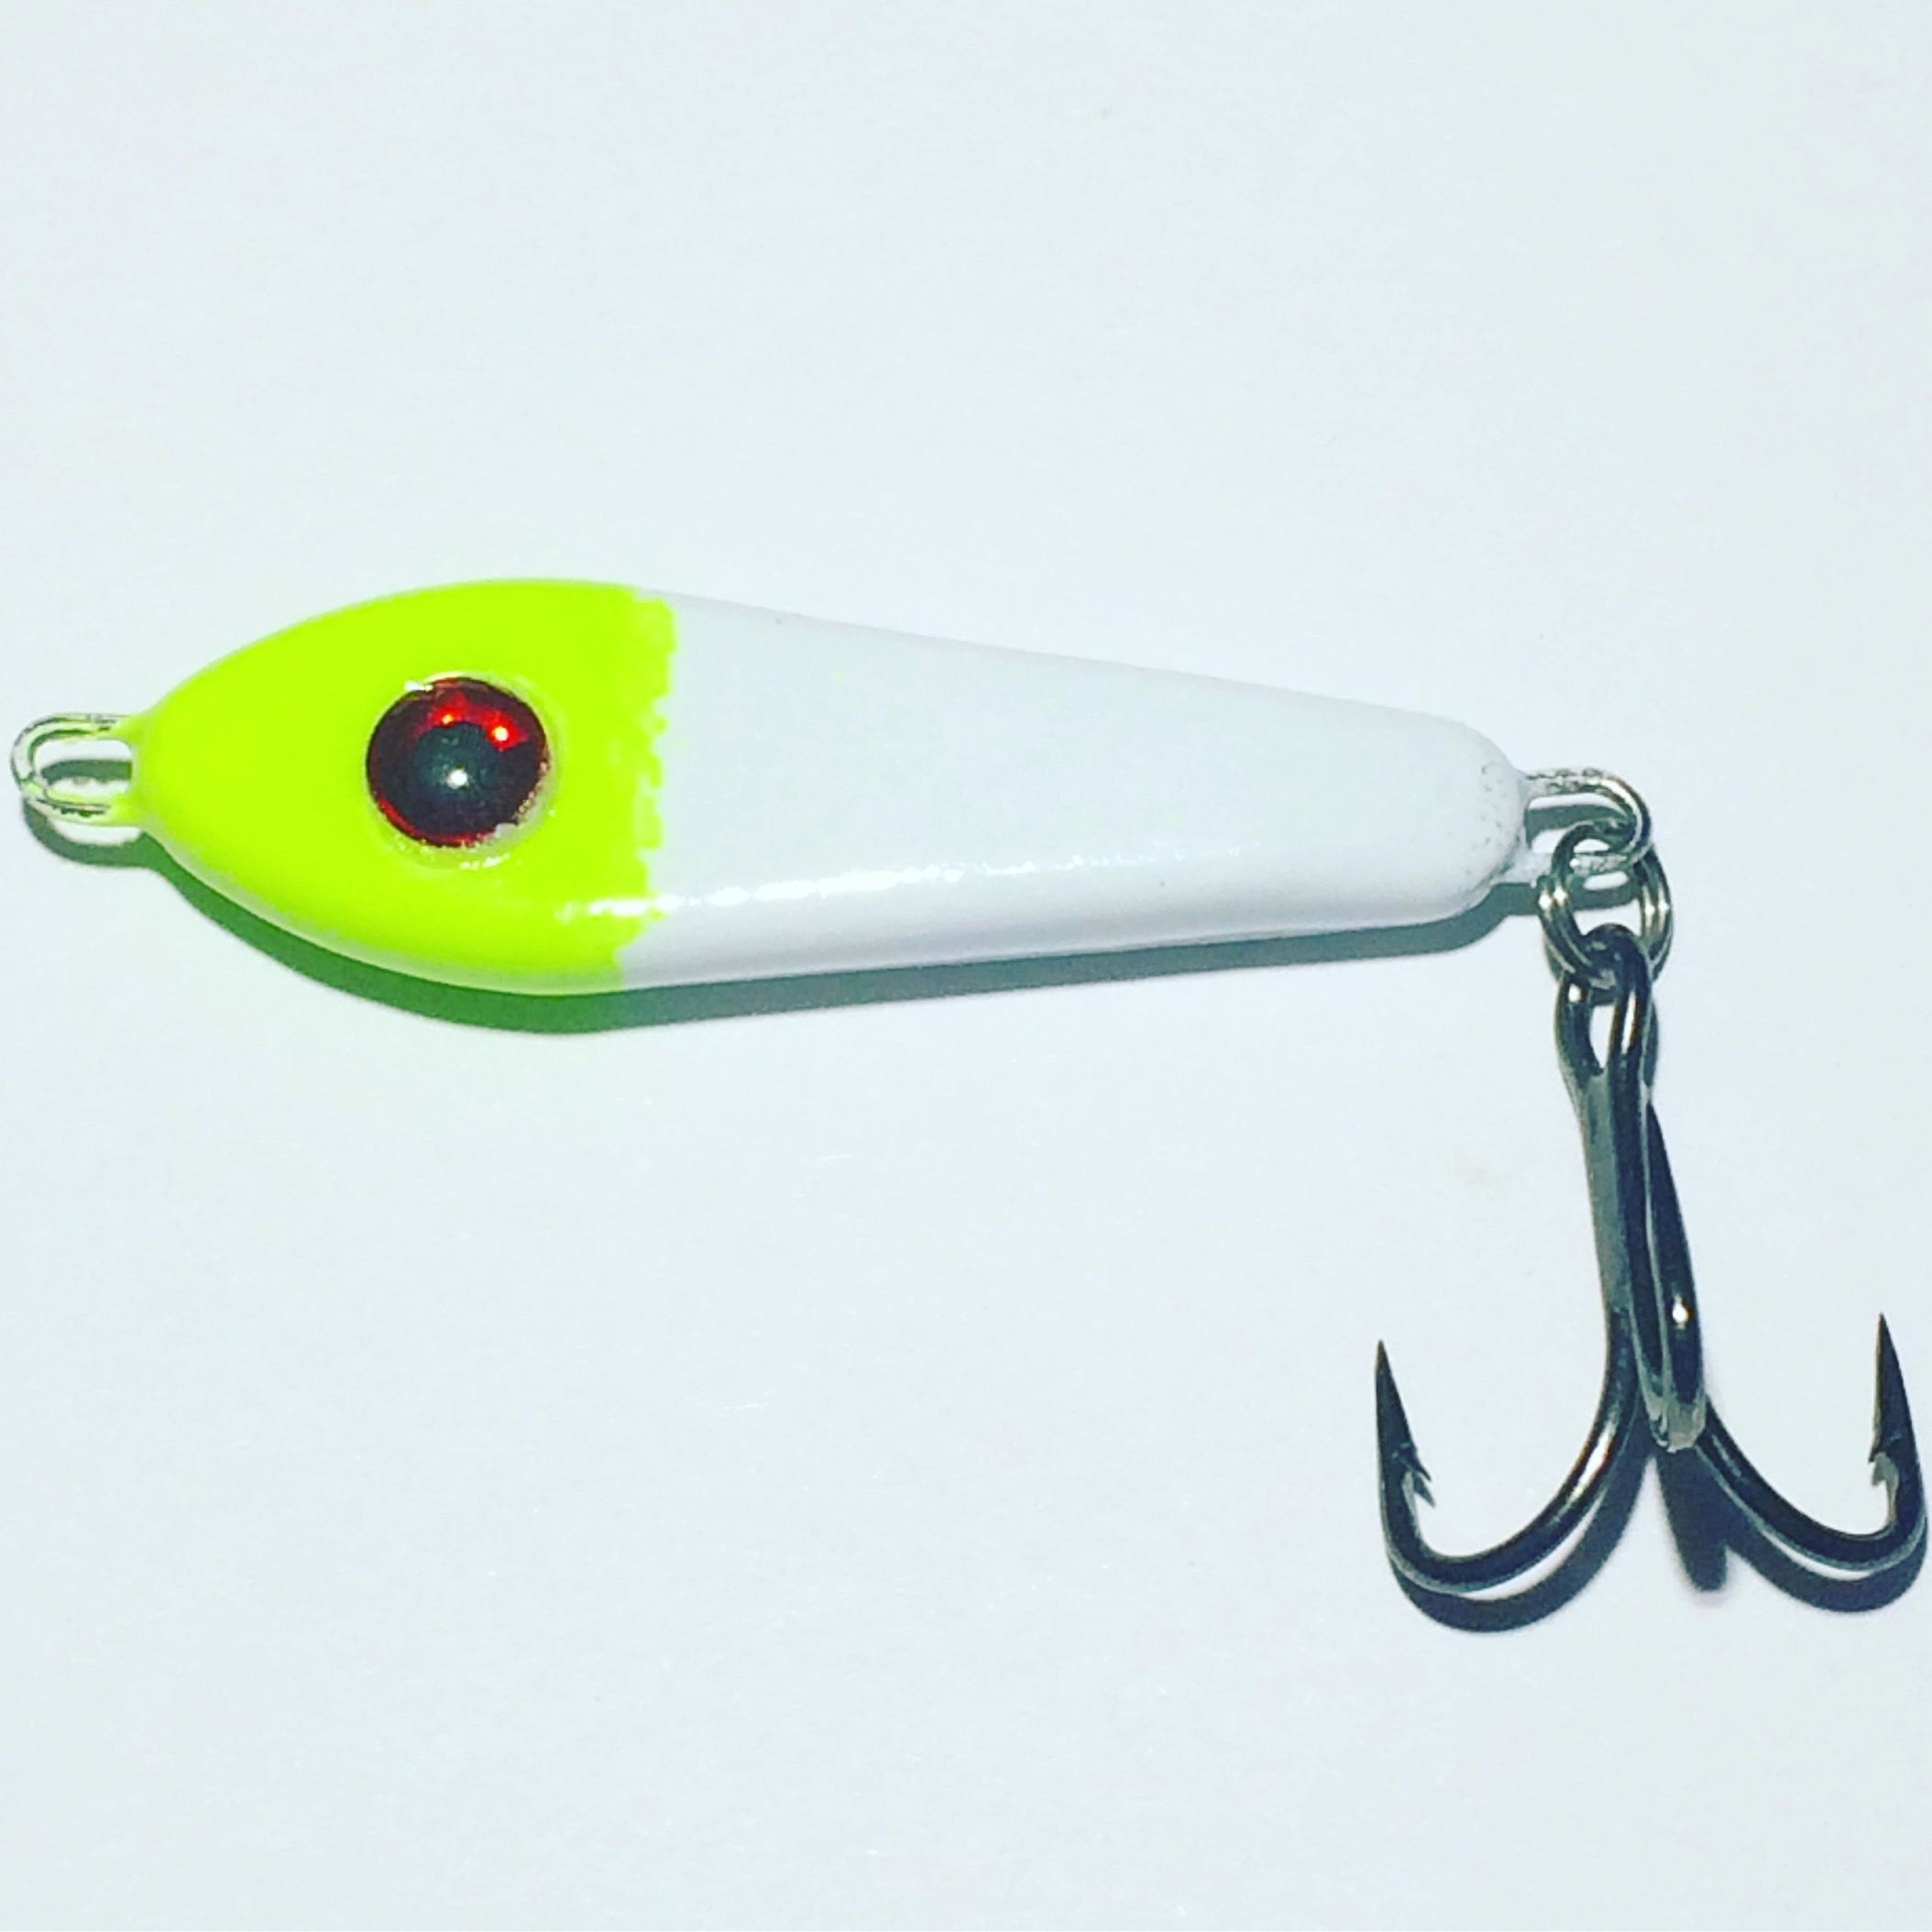 White Shad (Slab)  Constant Pursuit Outfitters